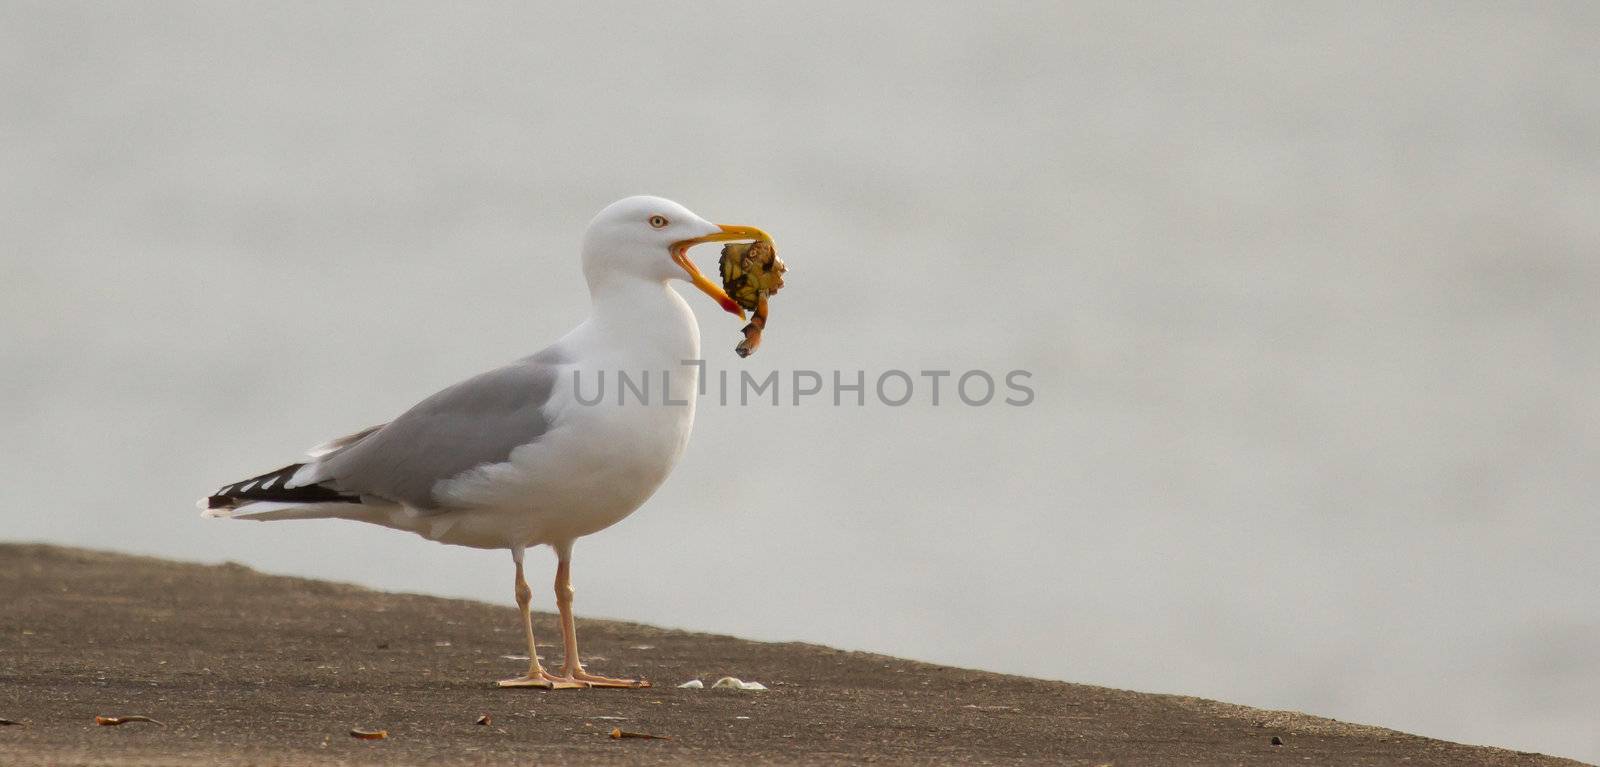 A seagull is eating crab by michaklootwijk